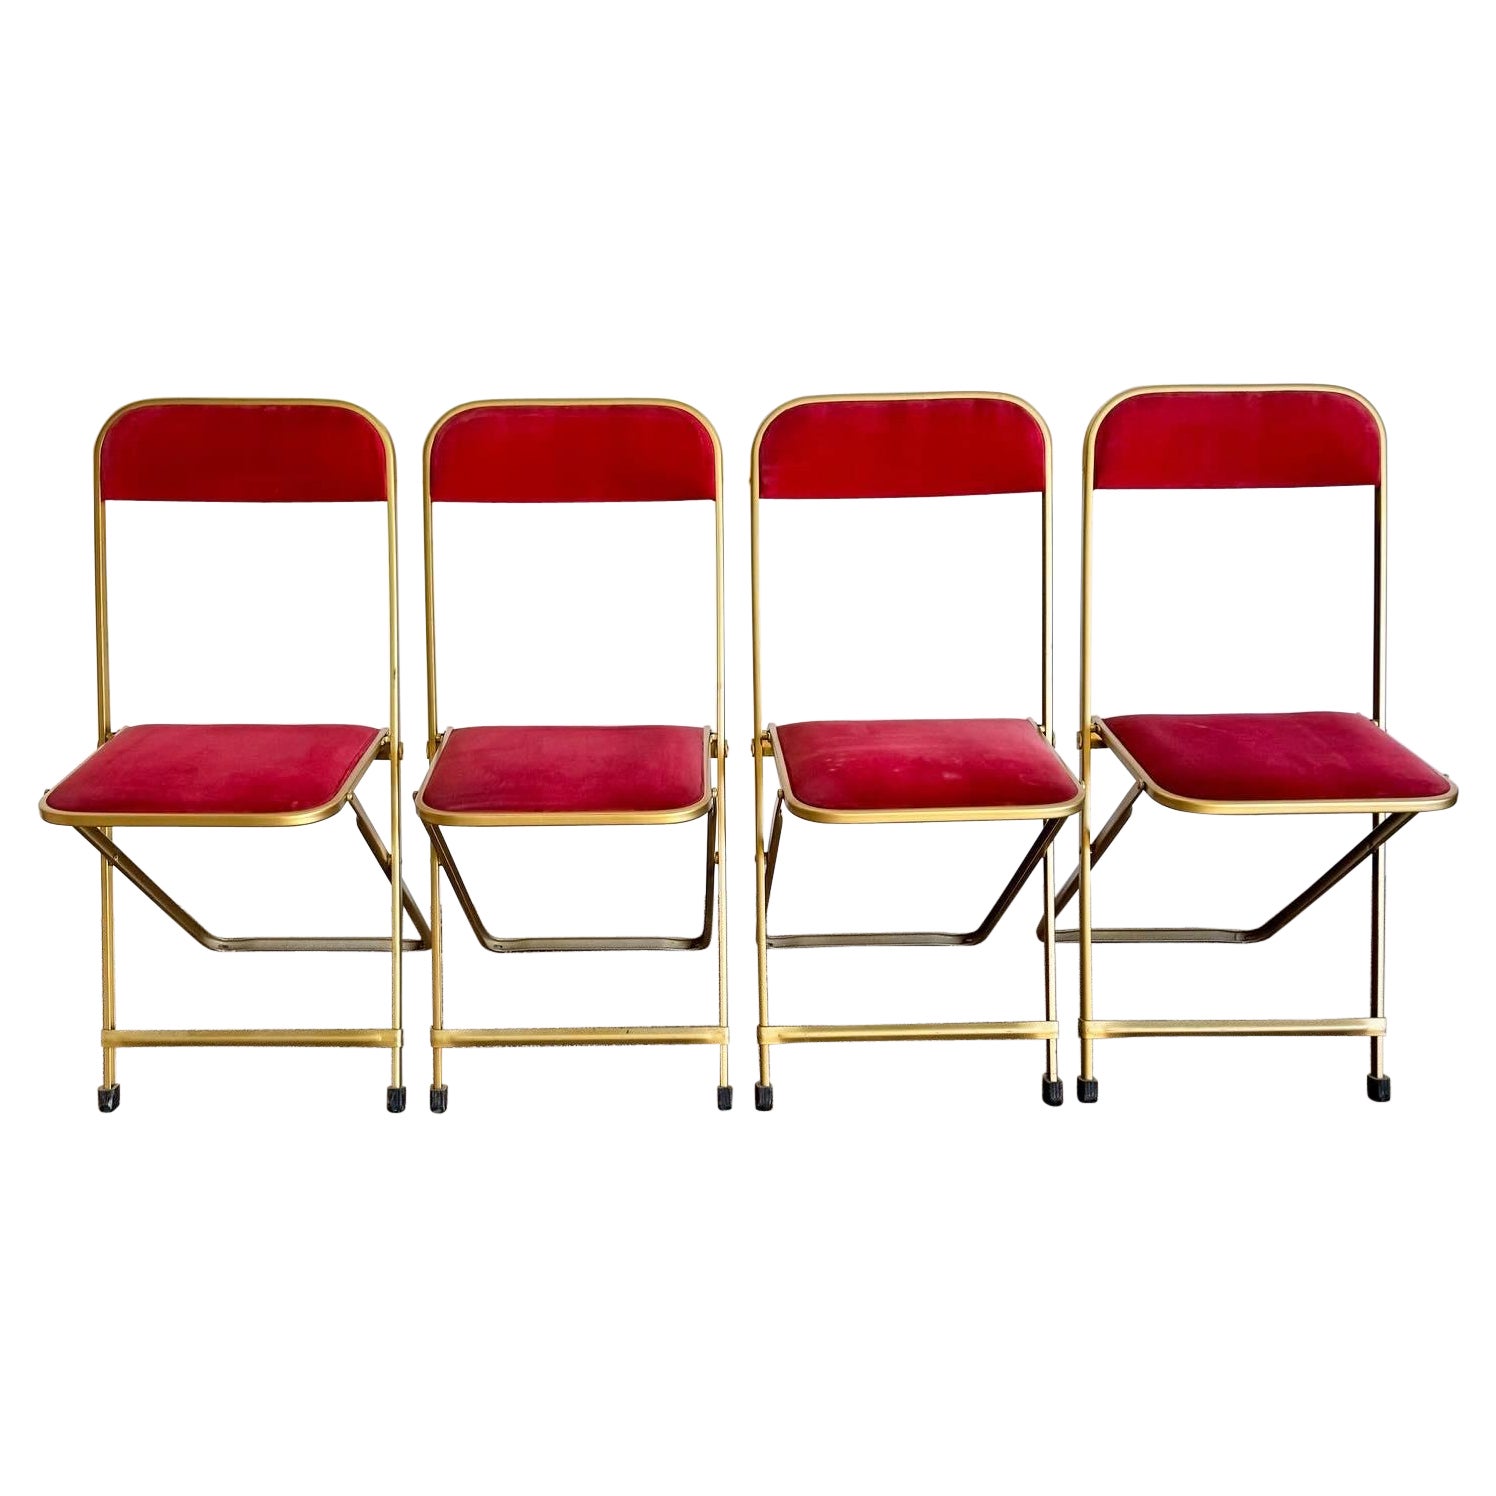 Vintage Gold and Red Folding Chairs by A. Fritz and Co - Set of 4 For Sale